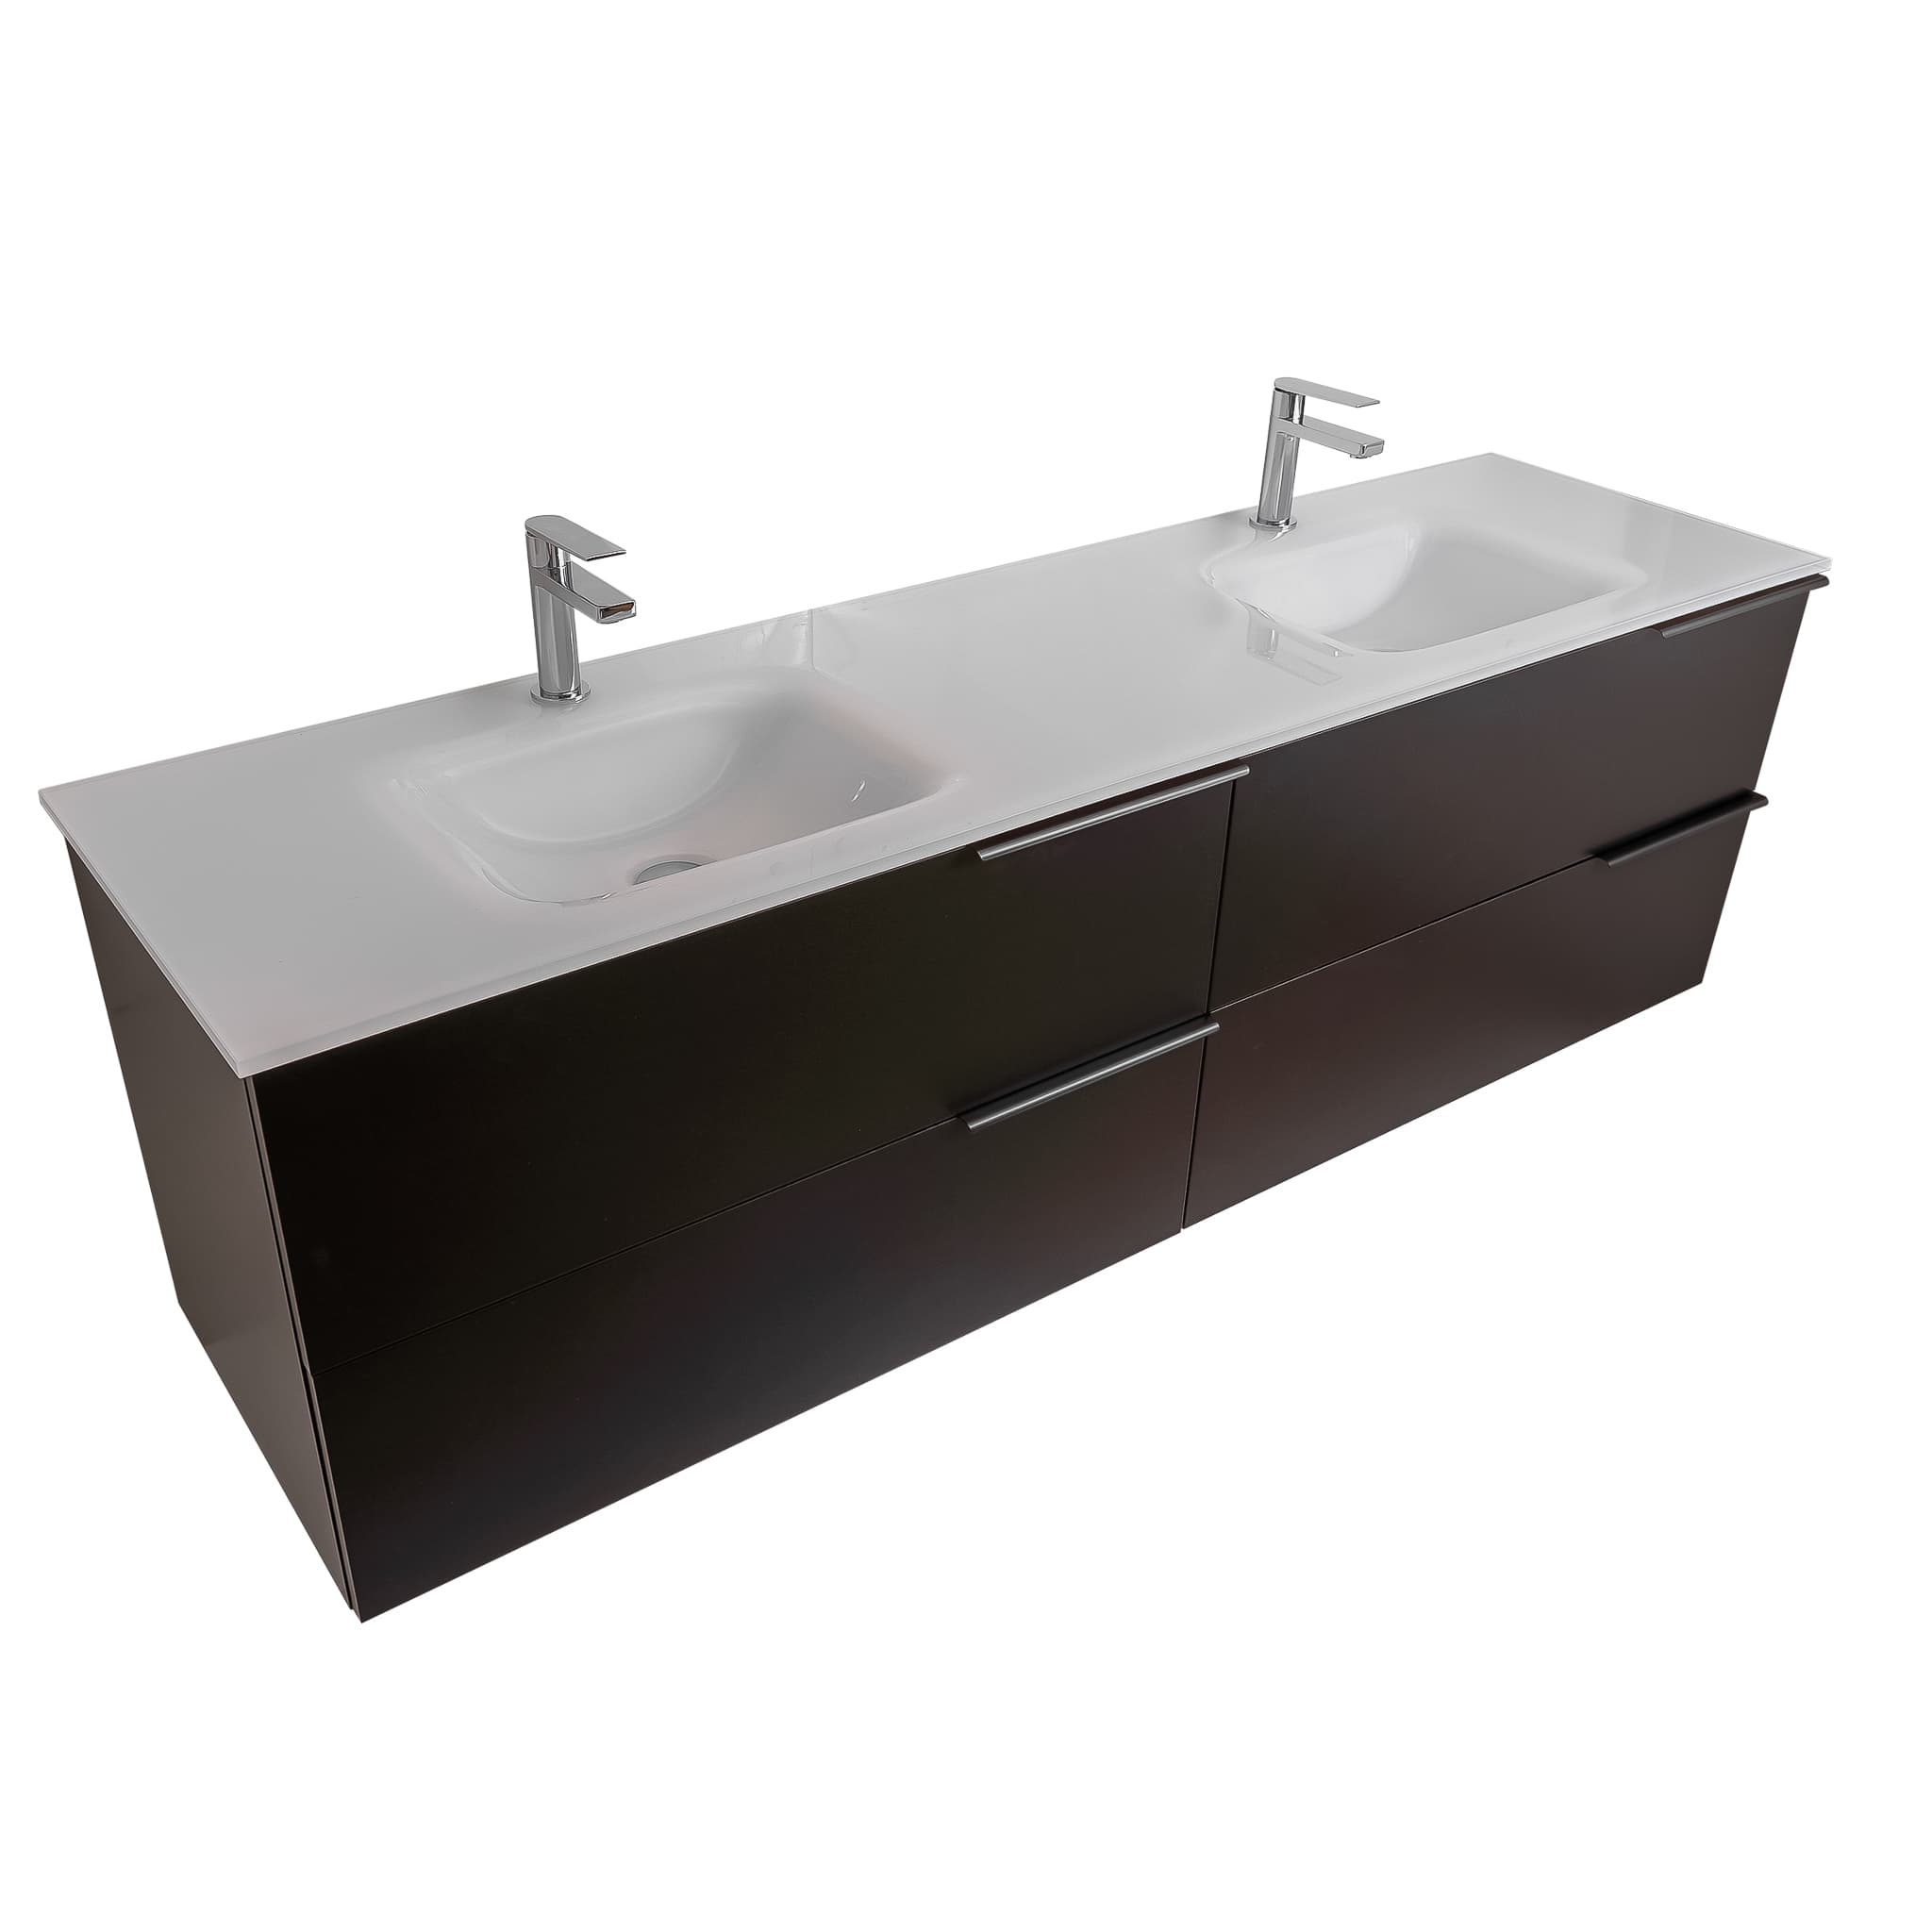 Mallorca 63 Matte Black Cabinet, White Tempered Glass Double Sink, Wall Mounted Modern Vanity Set